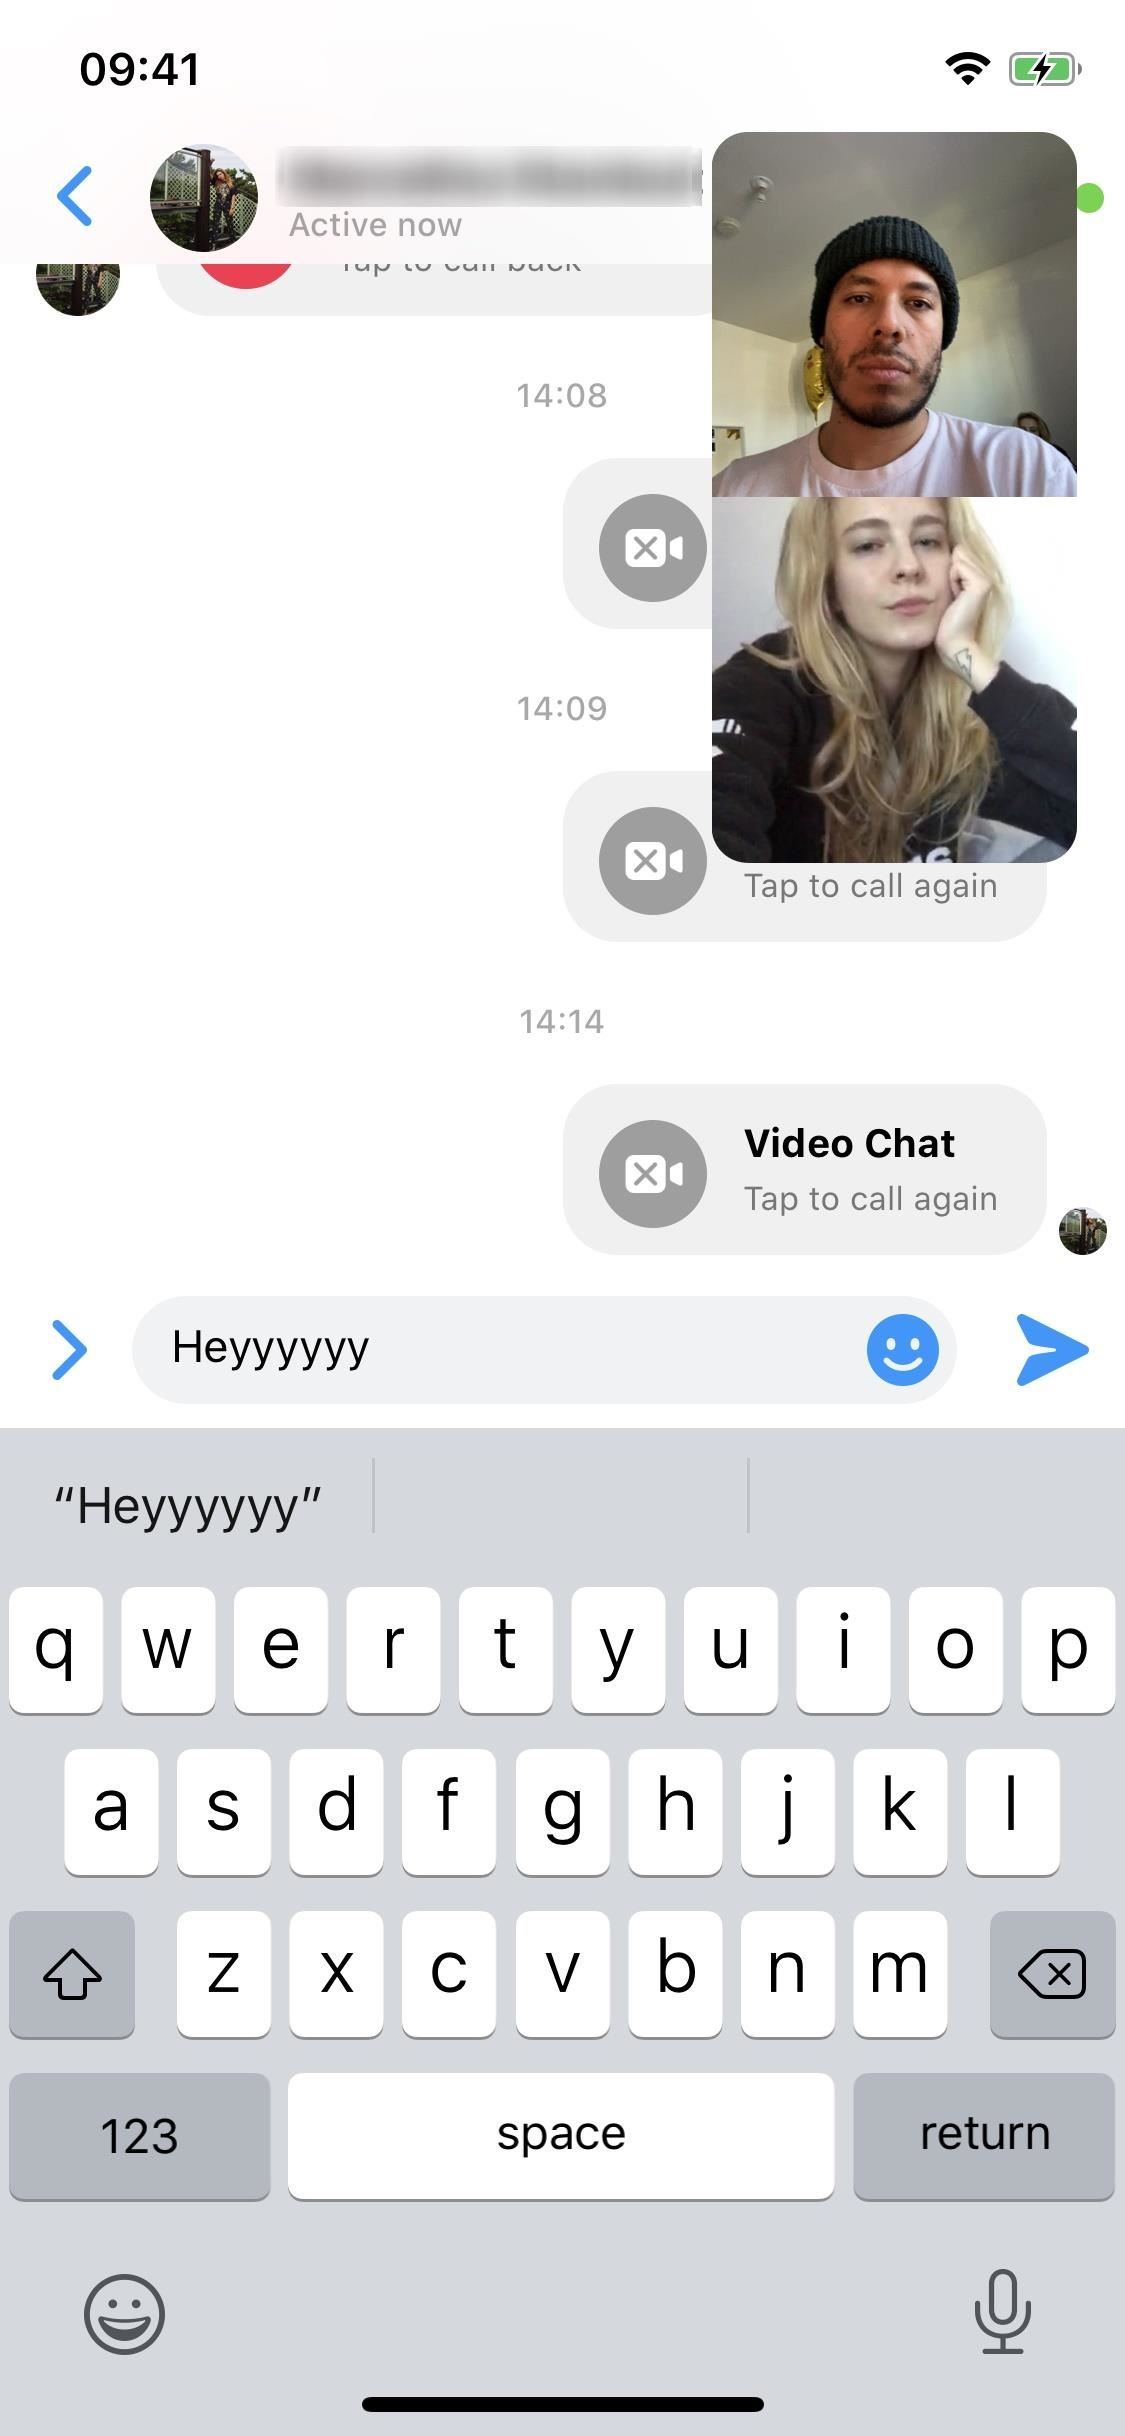 Facebook messenger video chat icon moving